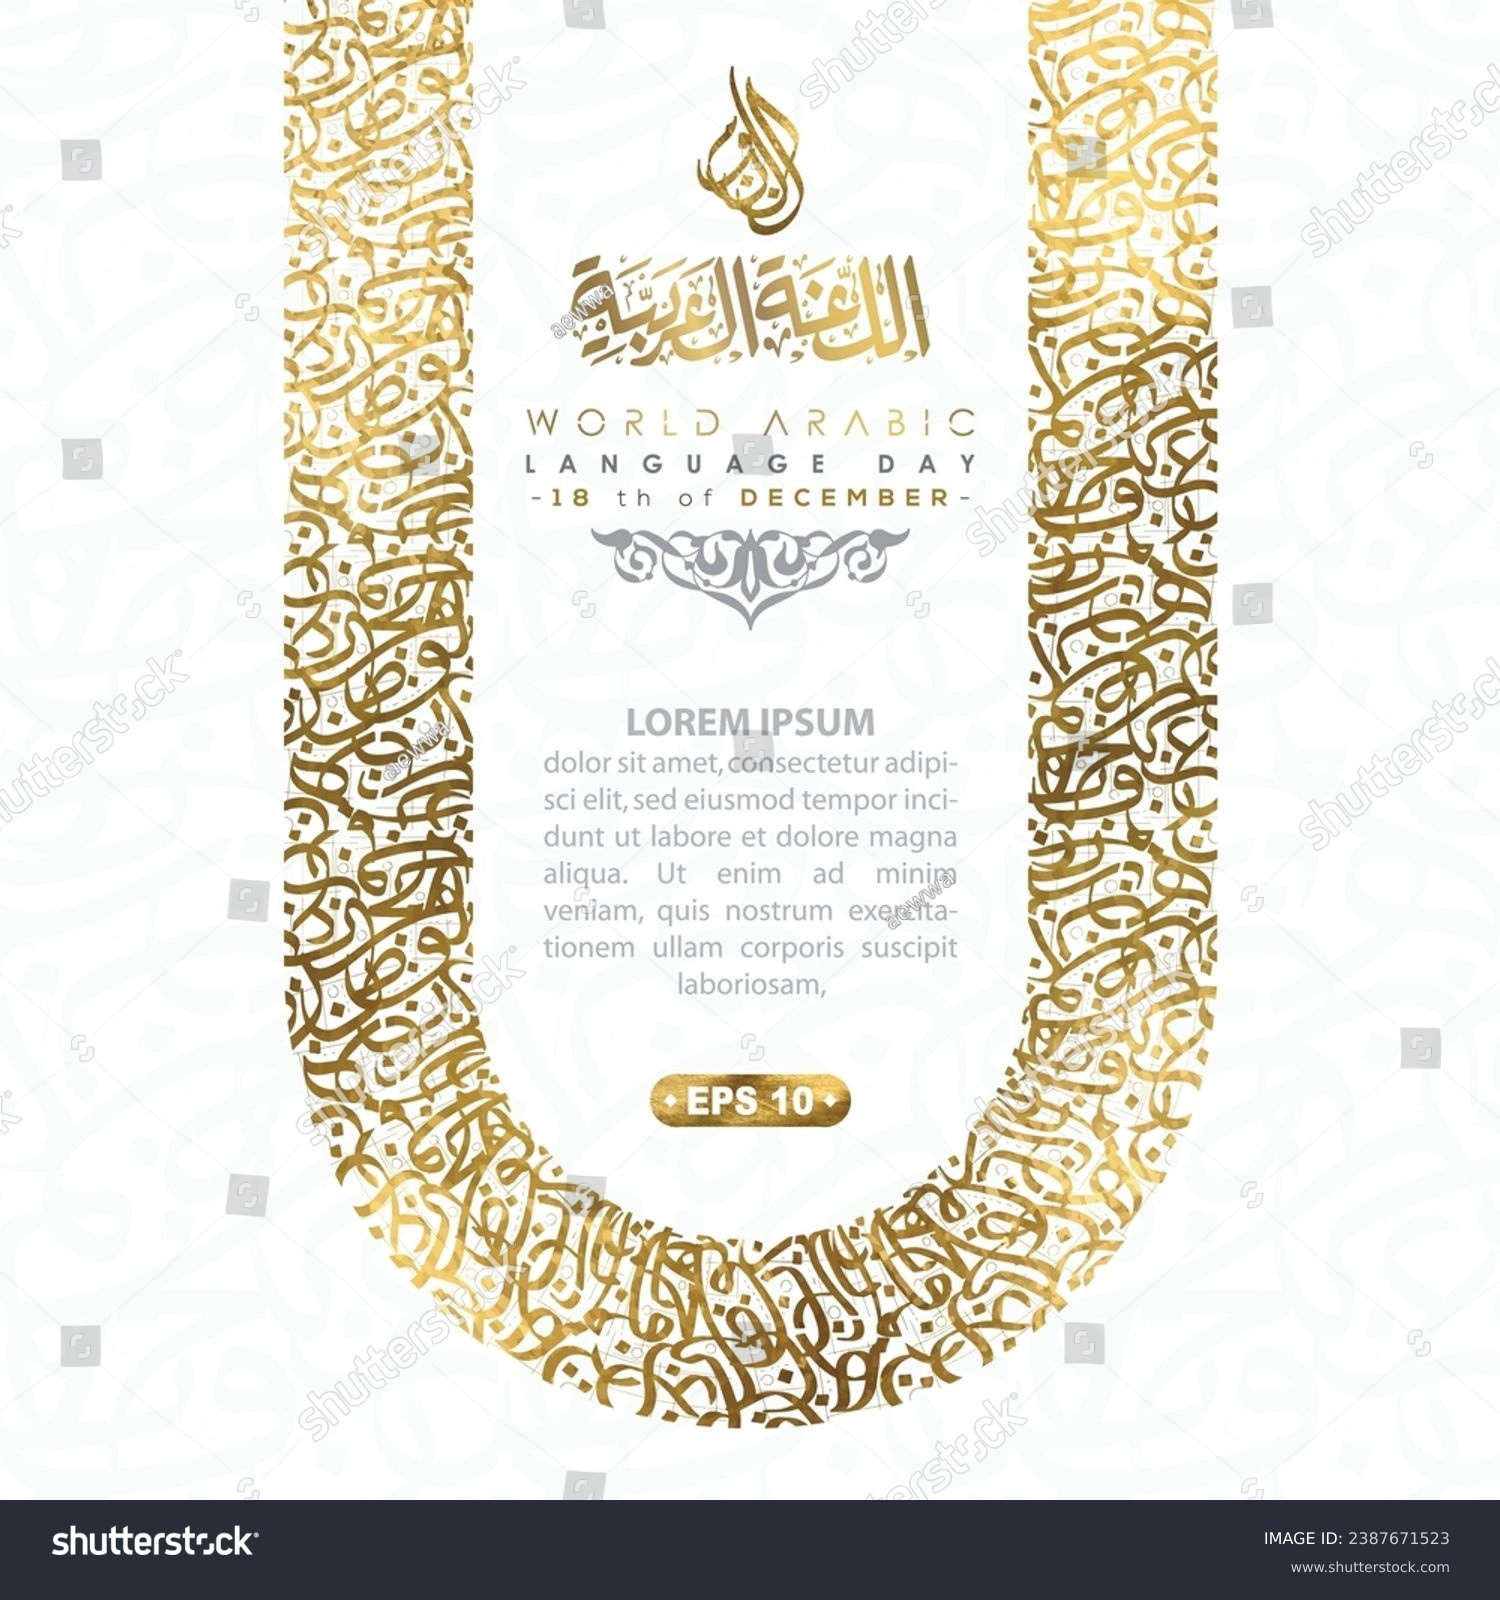 World Arabic Language Day 18th December Vector Design with Beautiful Random Shiny Gold Arabic Calligraphy Without Specific Meaning In English. Translation of Text : WORLD ARABIC LANGUAGE DAY #2387671523